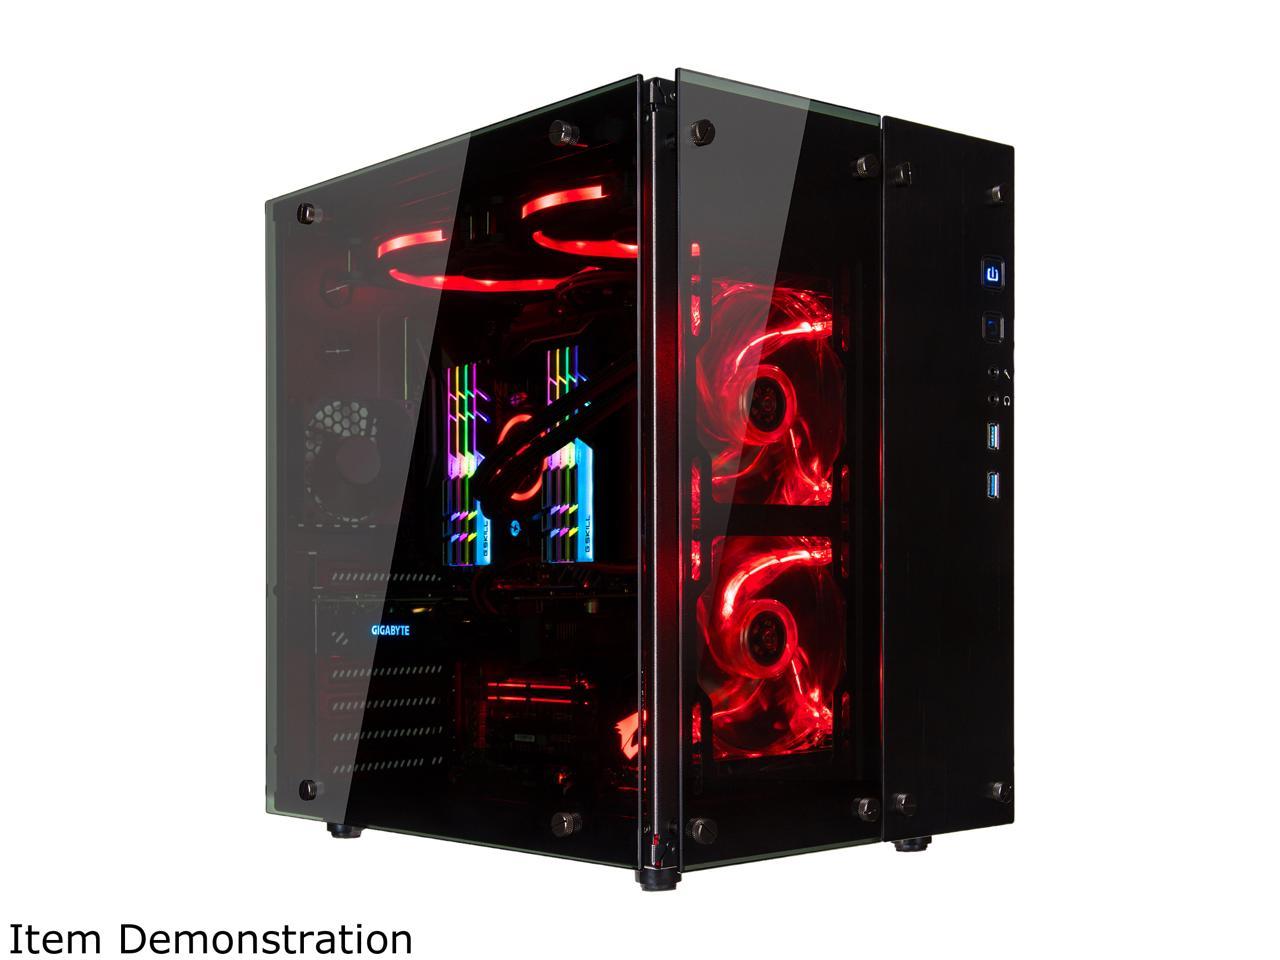 Rosewill Cube Mini ITX/Micro-ATX/ATX Mid Tower Gaming PC Computer Case, Black Steel Tempered Glass, Red LED Fans - Cullinan PX Red